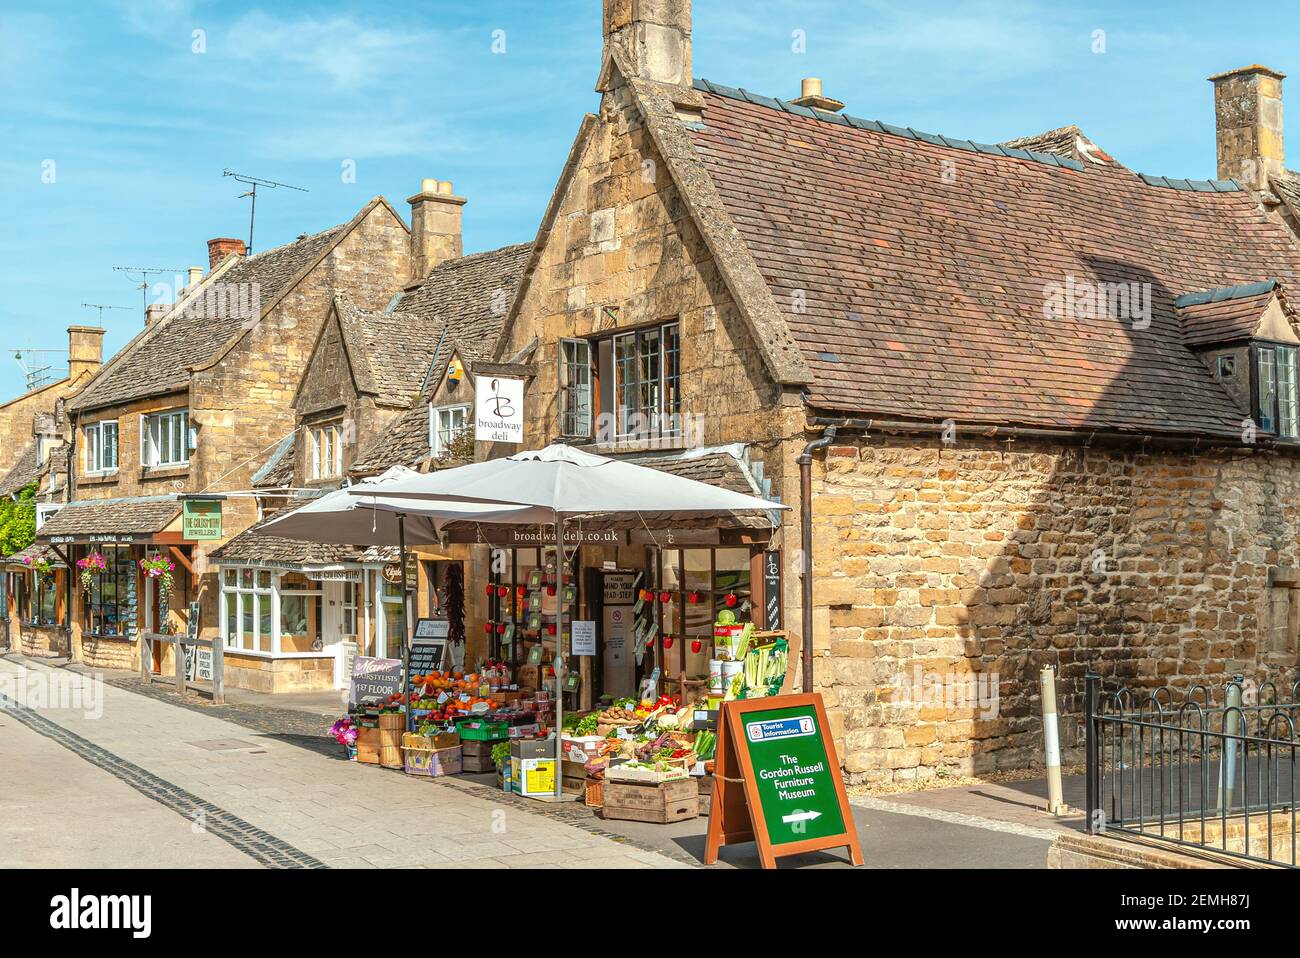 Vegetable shop at town centre of Broadway, a small Cotswold town in Worcestershire, England Stock Photo